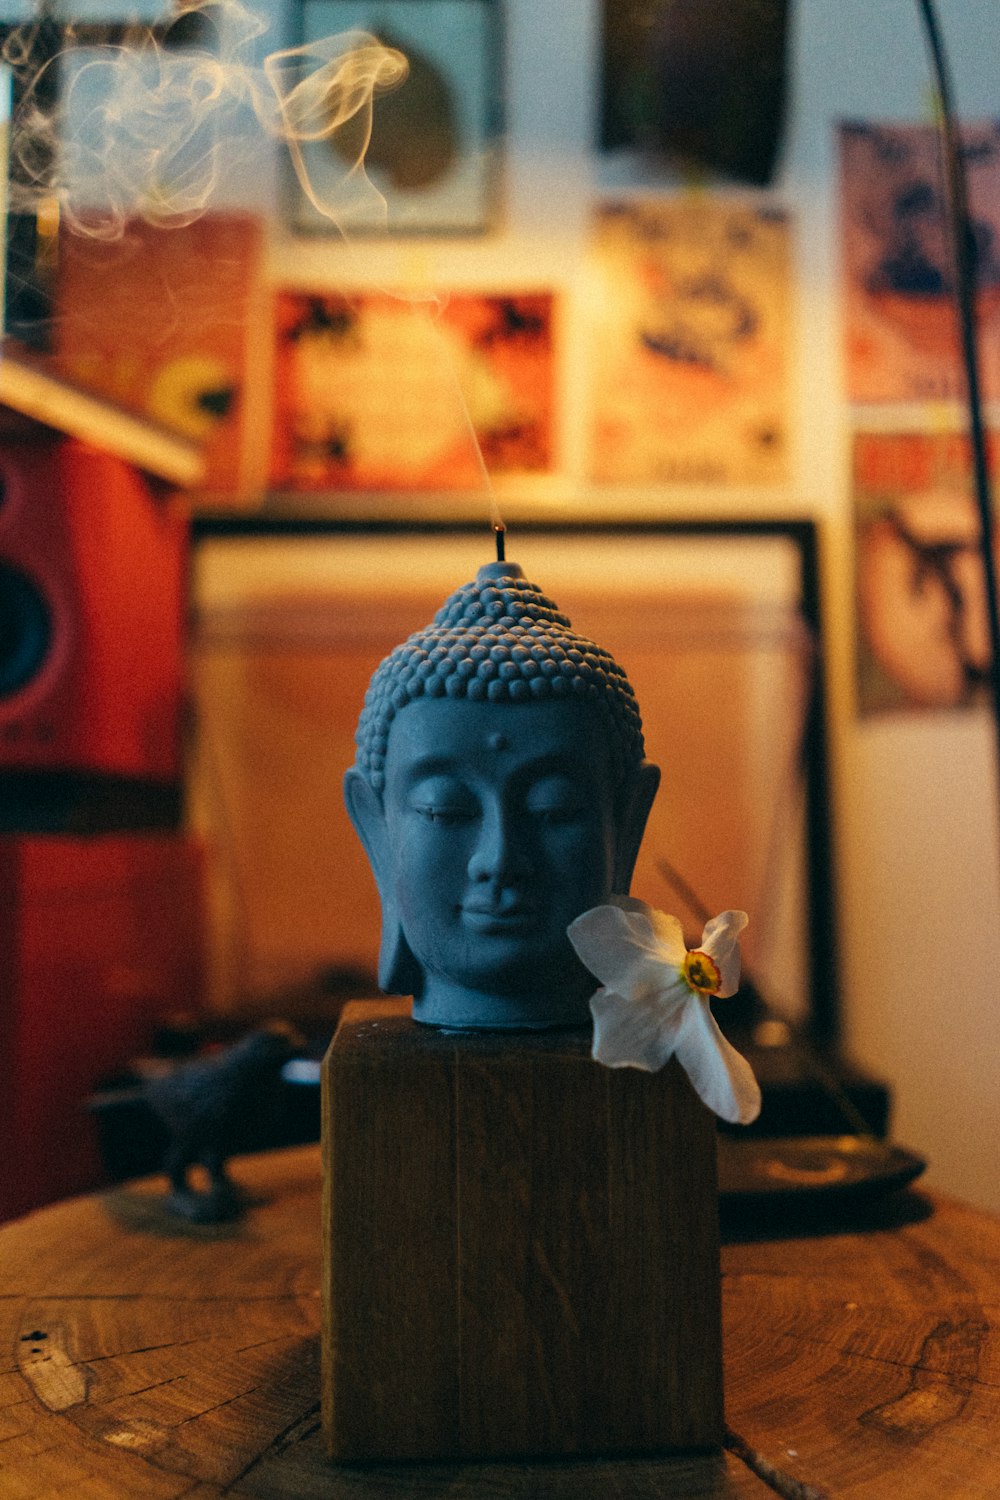 gray buddha figurine on brown wooden table